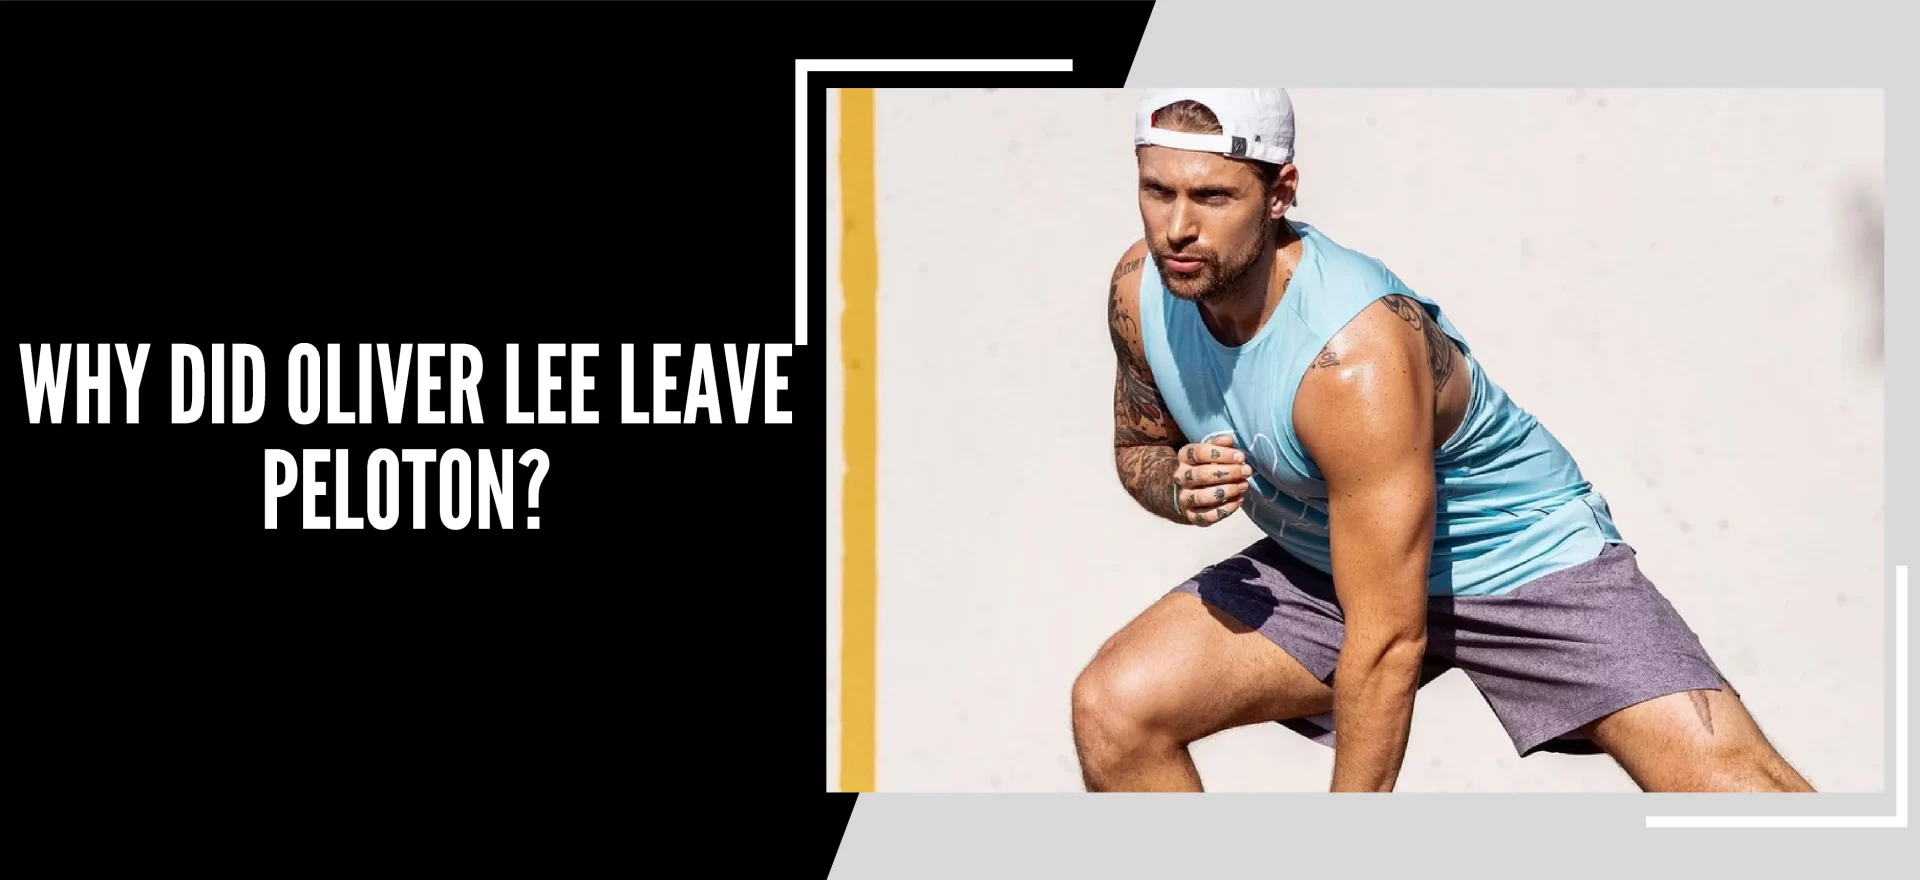 Why Did Oliver lee Leave Peloton